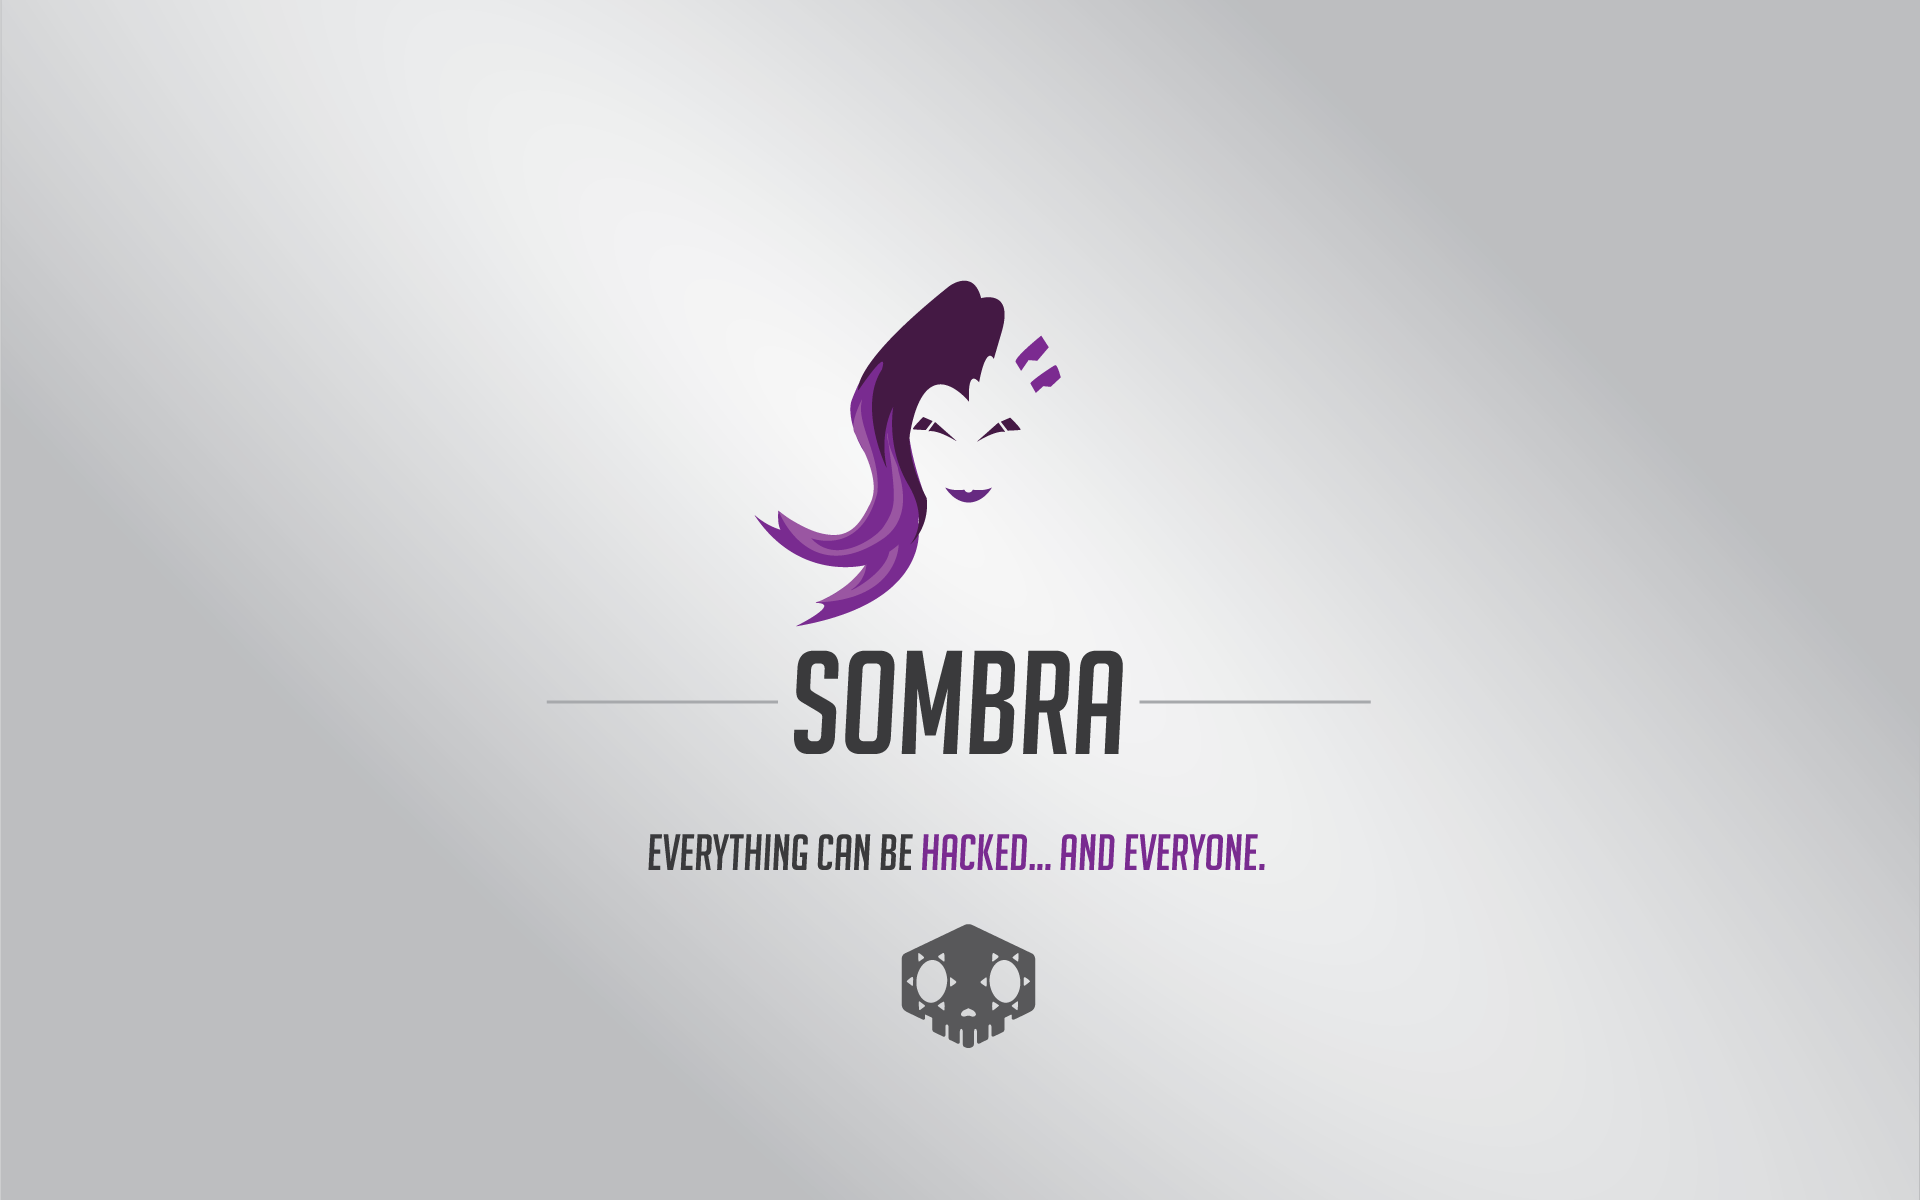 Sombra Everything Can Be Hacked And Everyone - HD Wallpaper 